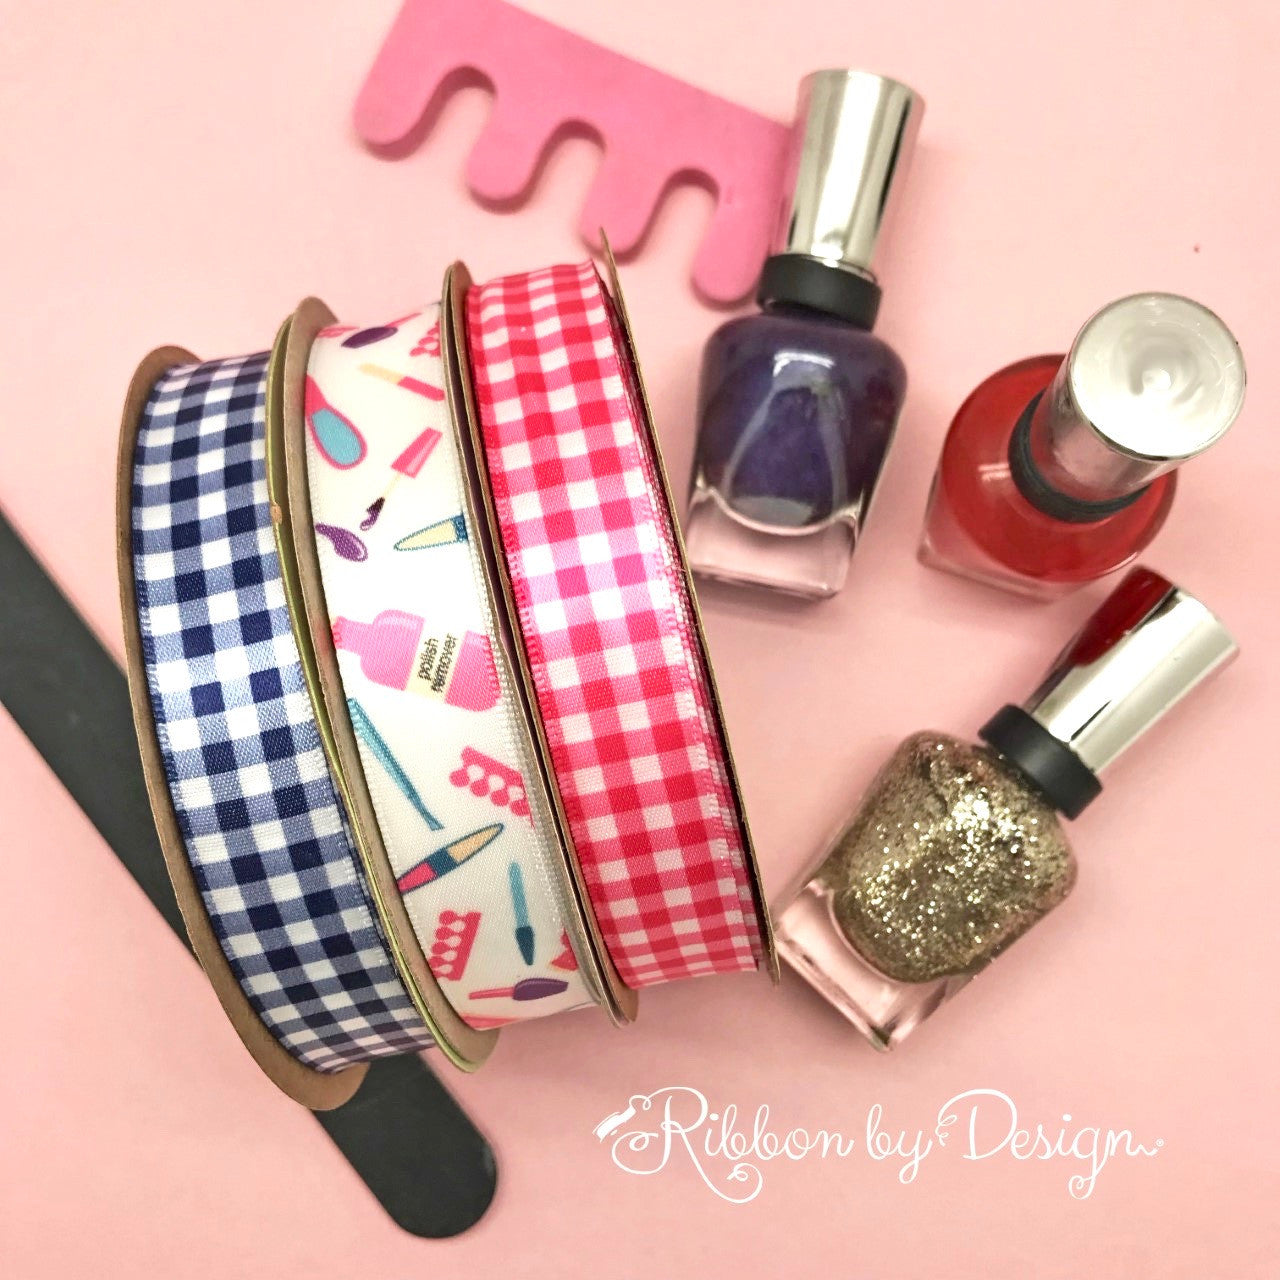 Pair our manicure ribbon with these fun ginghams to make a really special package for the manicurist who keeps your hands and feet looking great!